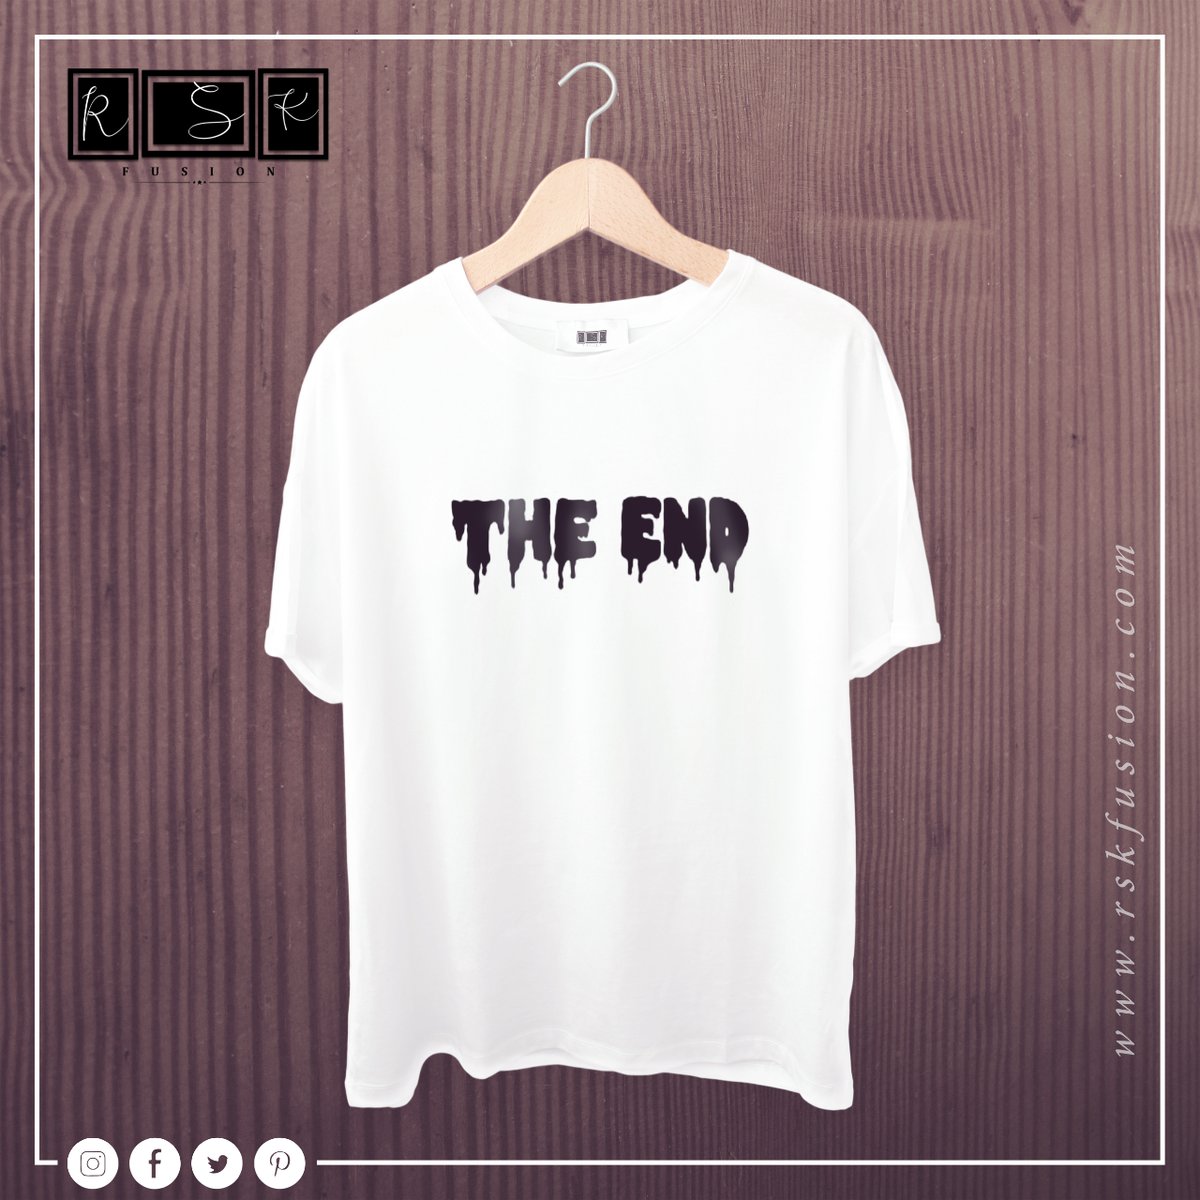 Everything has an end but there is no end to the collections of t-shirts at RSK fusion

Get customized T-Shirts now at rskfusion.com

#rskfusion #customizedtshirts #tshirts #tshirtprinting #gifts #fashion #trending #trendyteeze #streetstyle #printables #tshirtstore